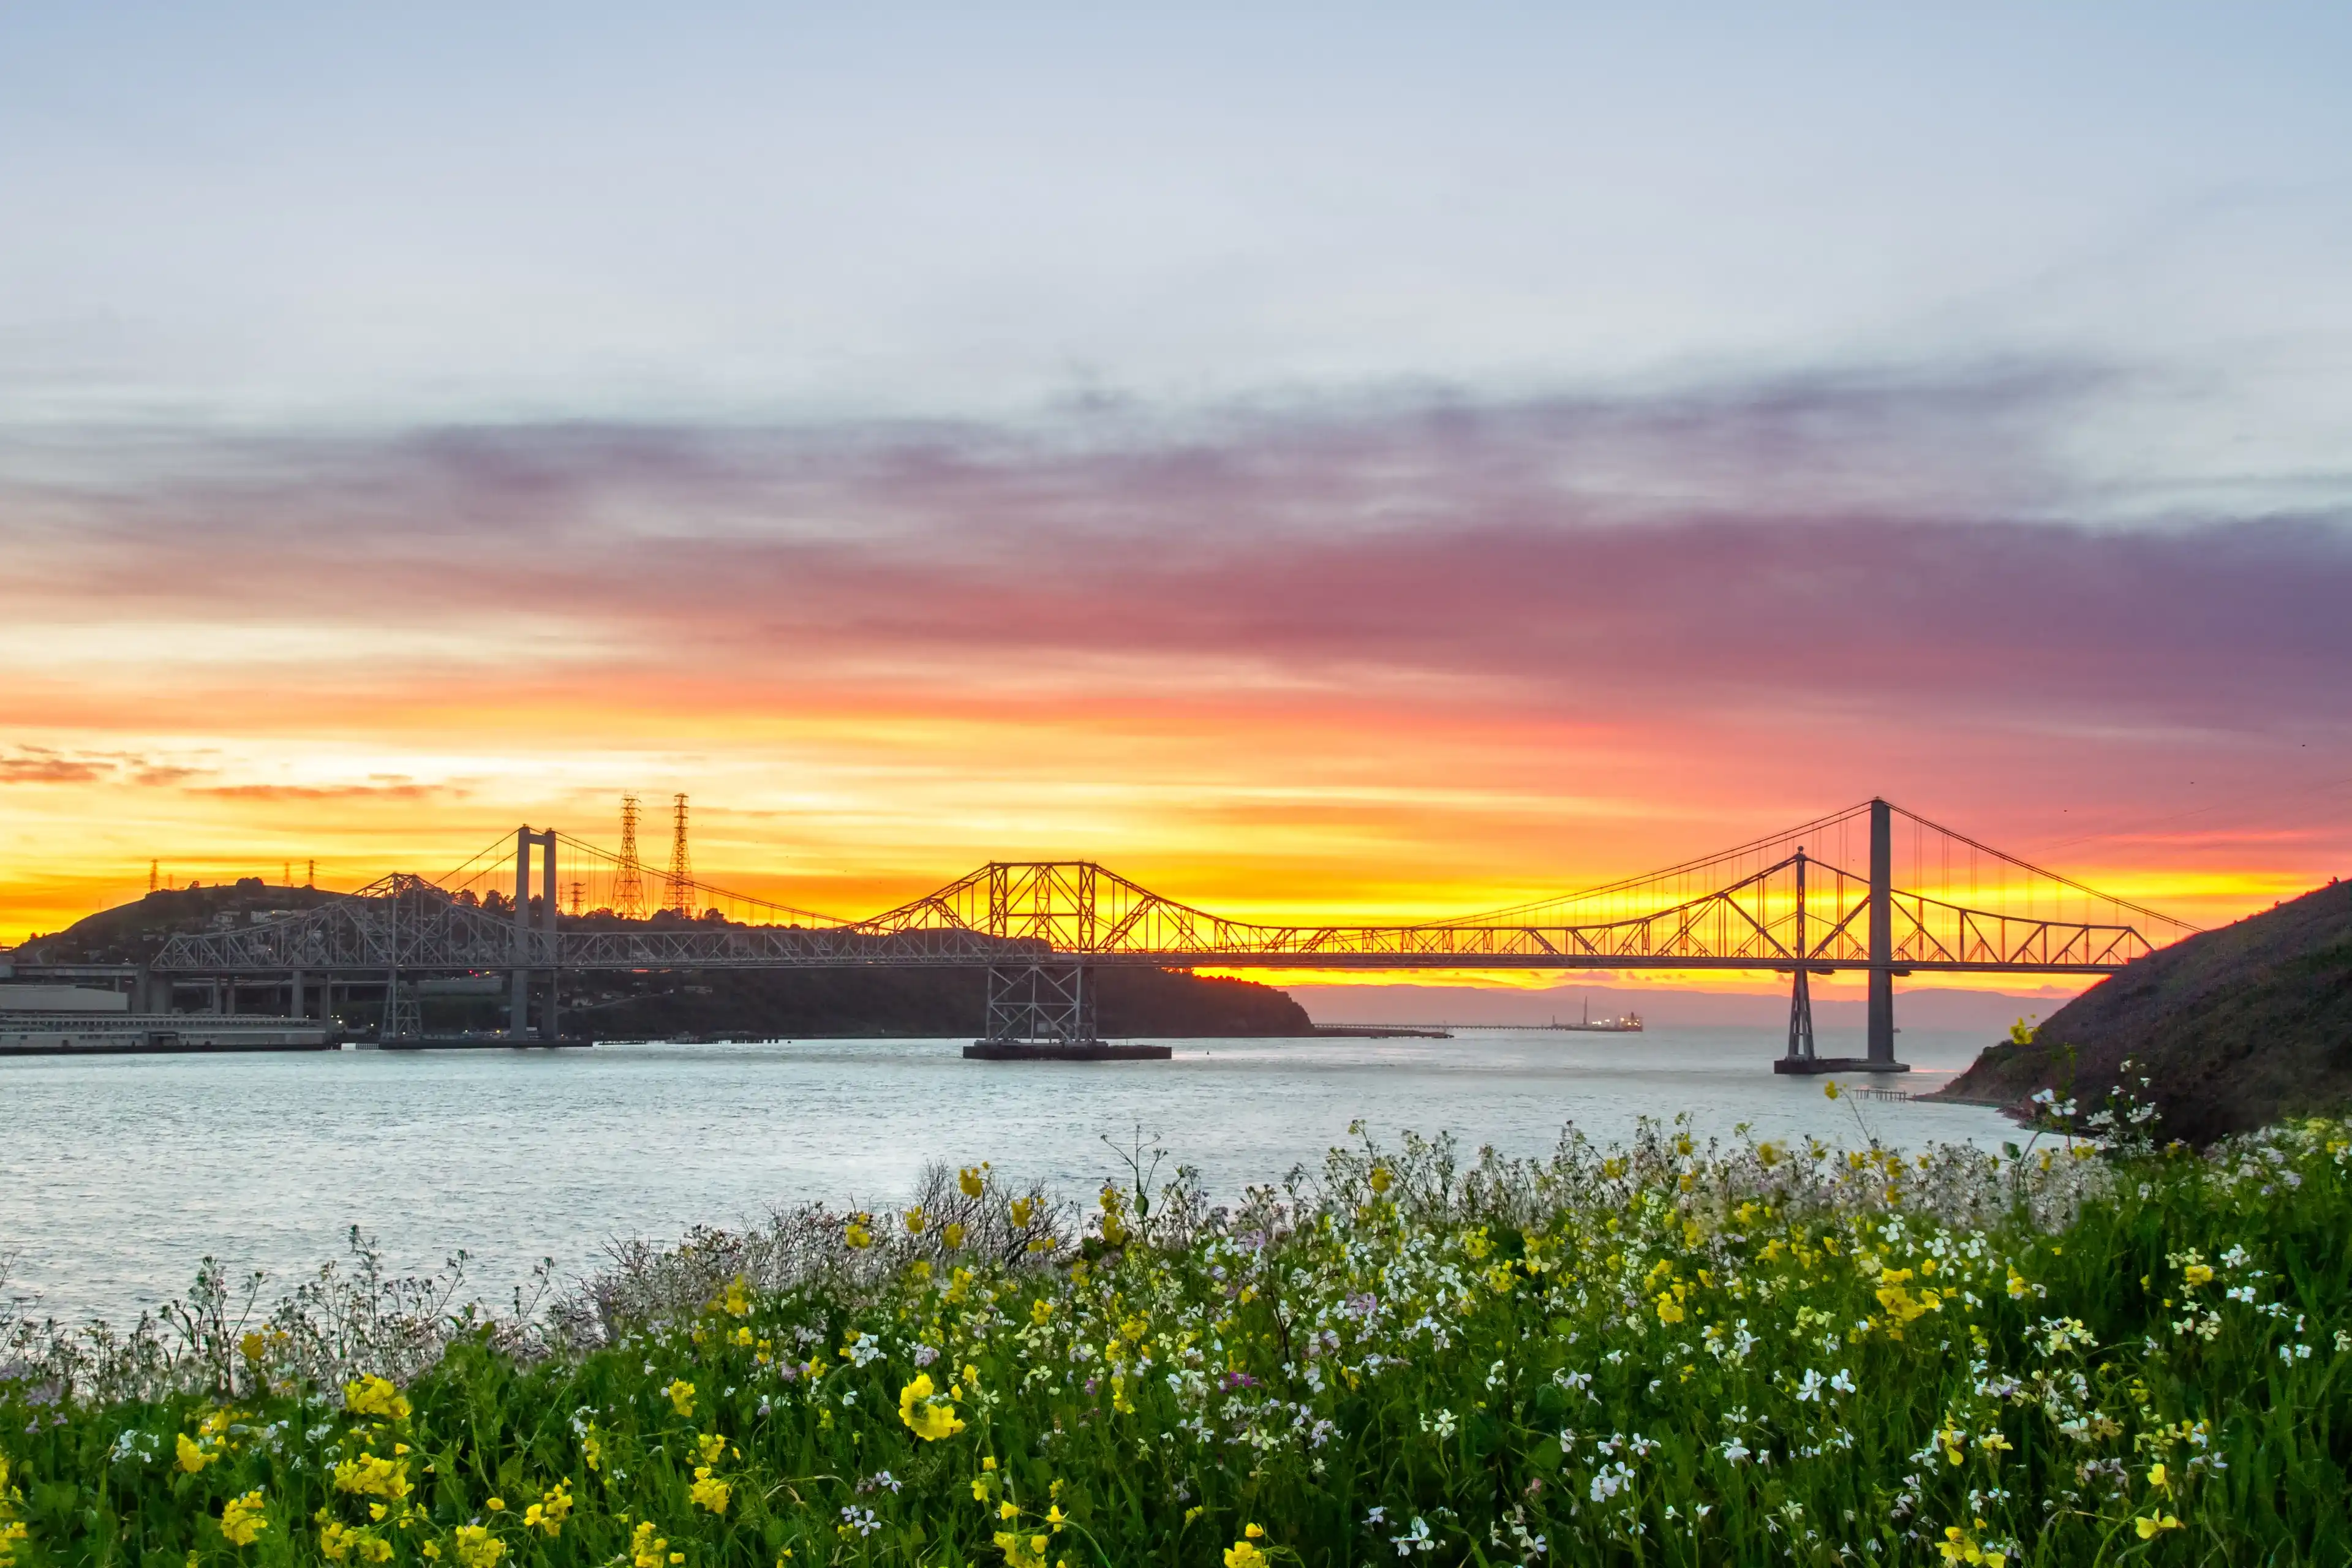 Sunset lights up the sky behind the Carquinez bridge in the Bay area of California. 